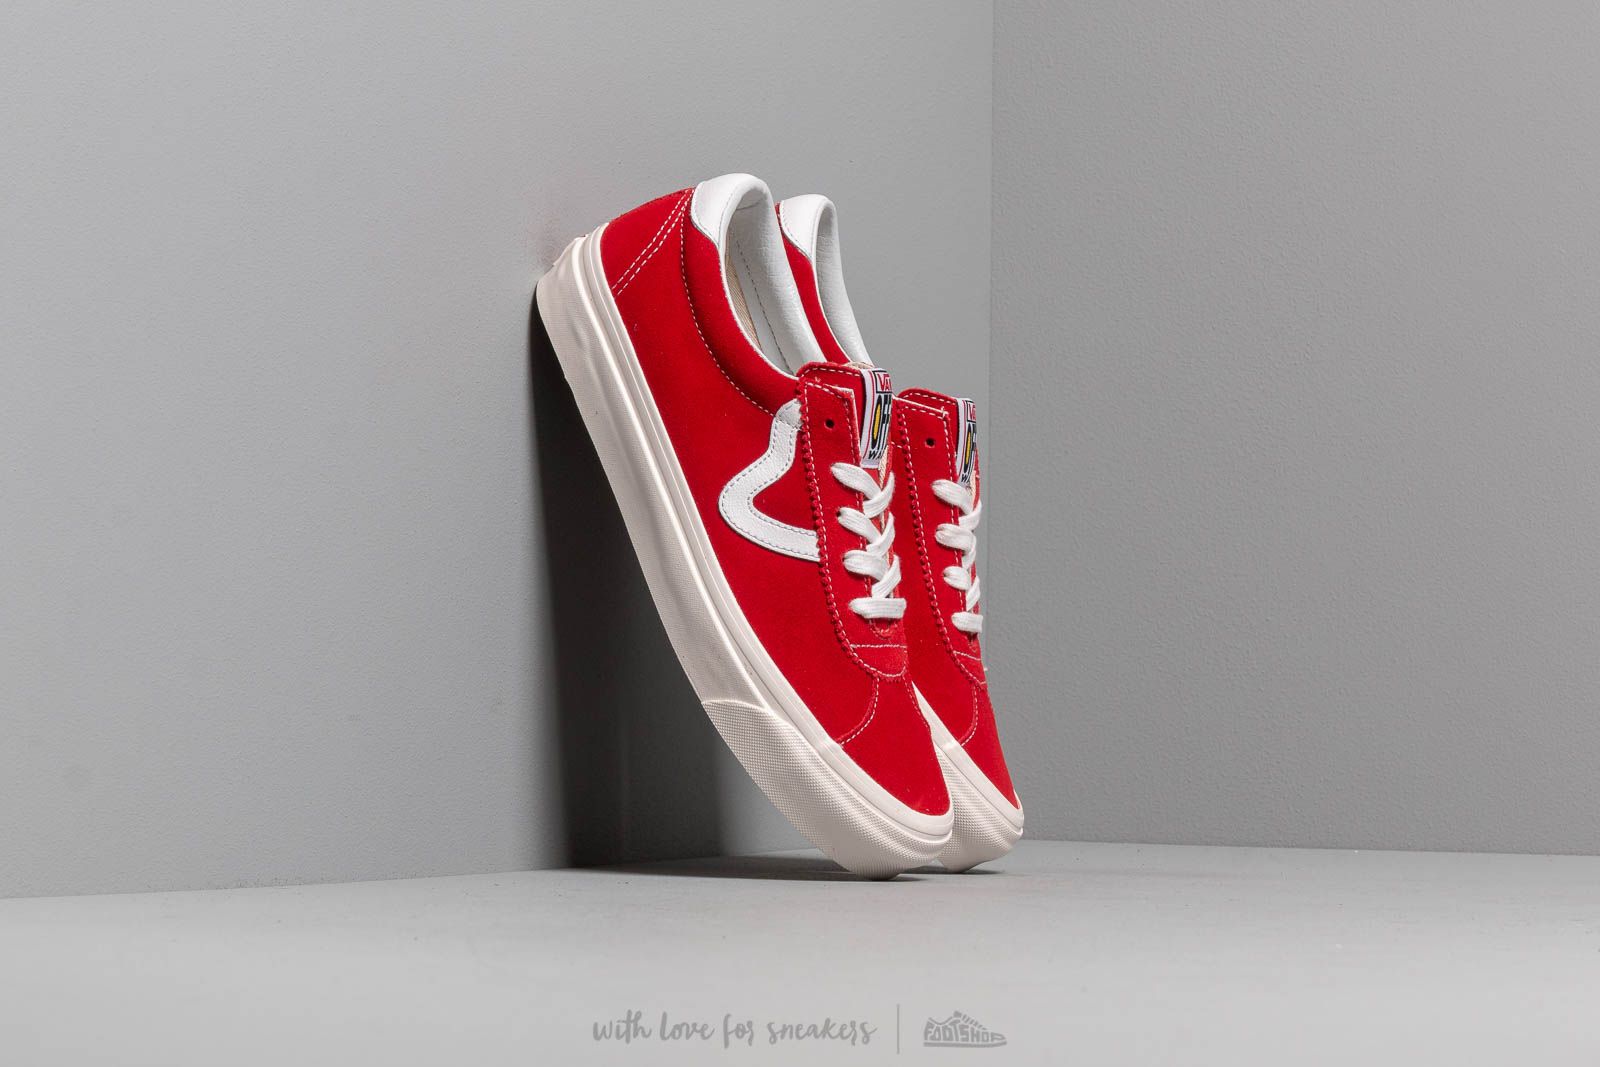 Chaussures et baskets homme Vans Style 73 DX (Anaheim Factory) Og Red/ White